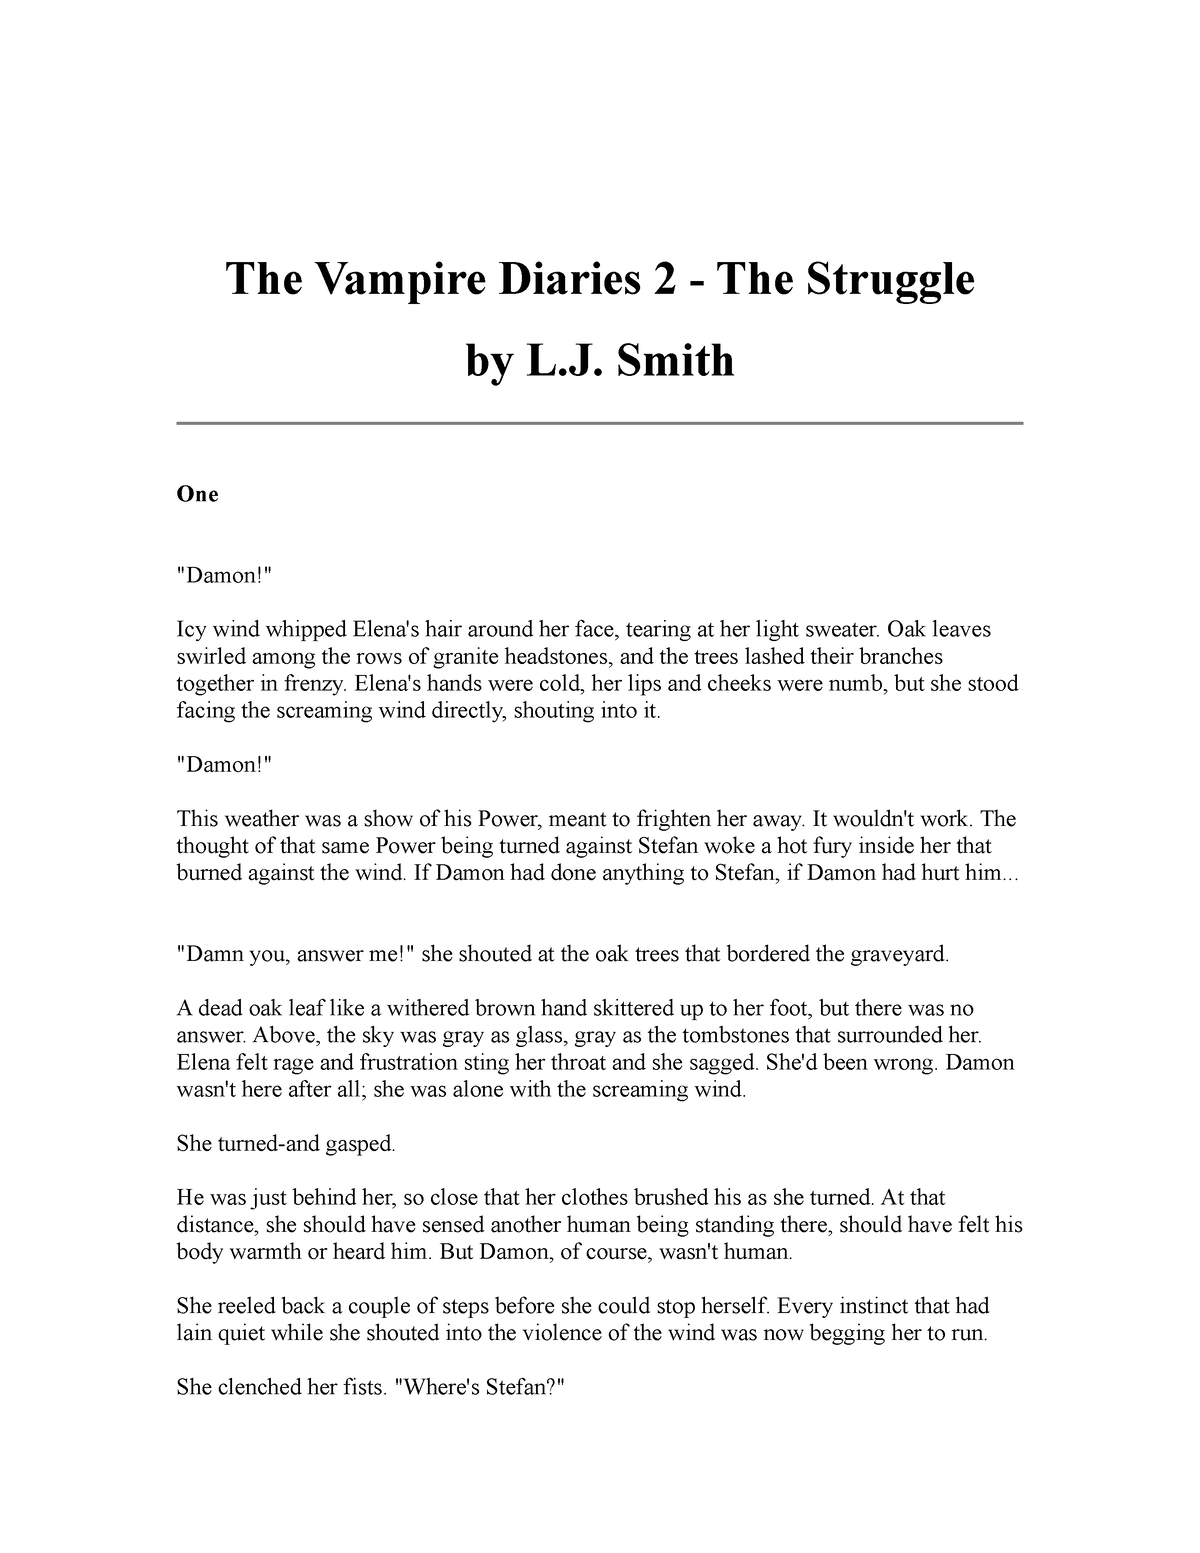 the vampire diaries review essay